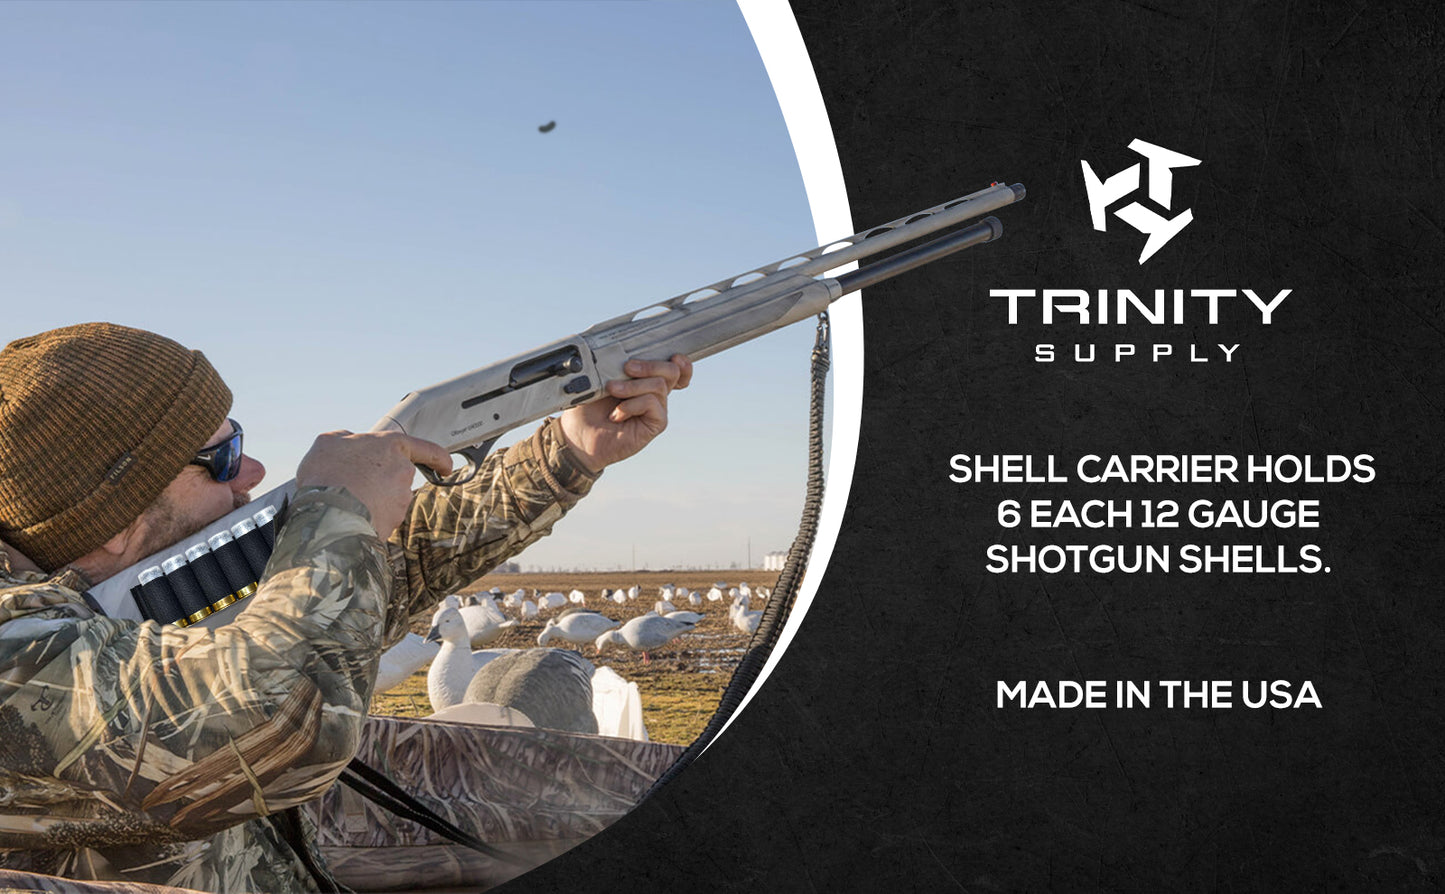 Trinity Shell Holder Made In USA Compatible With Stoeger M3000 12 gauge.